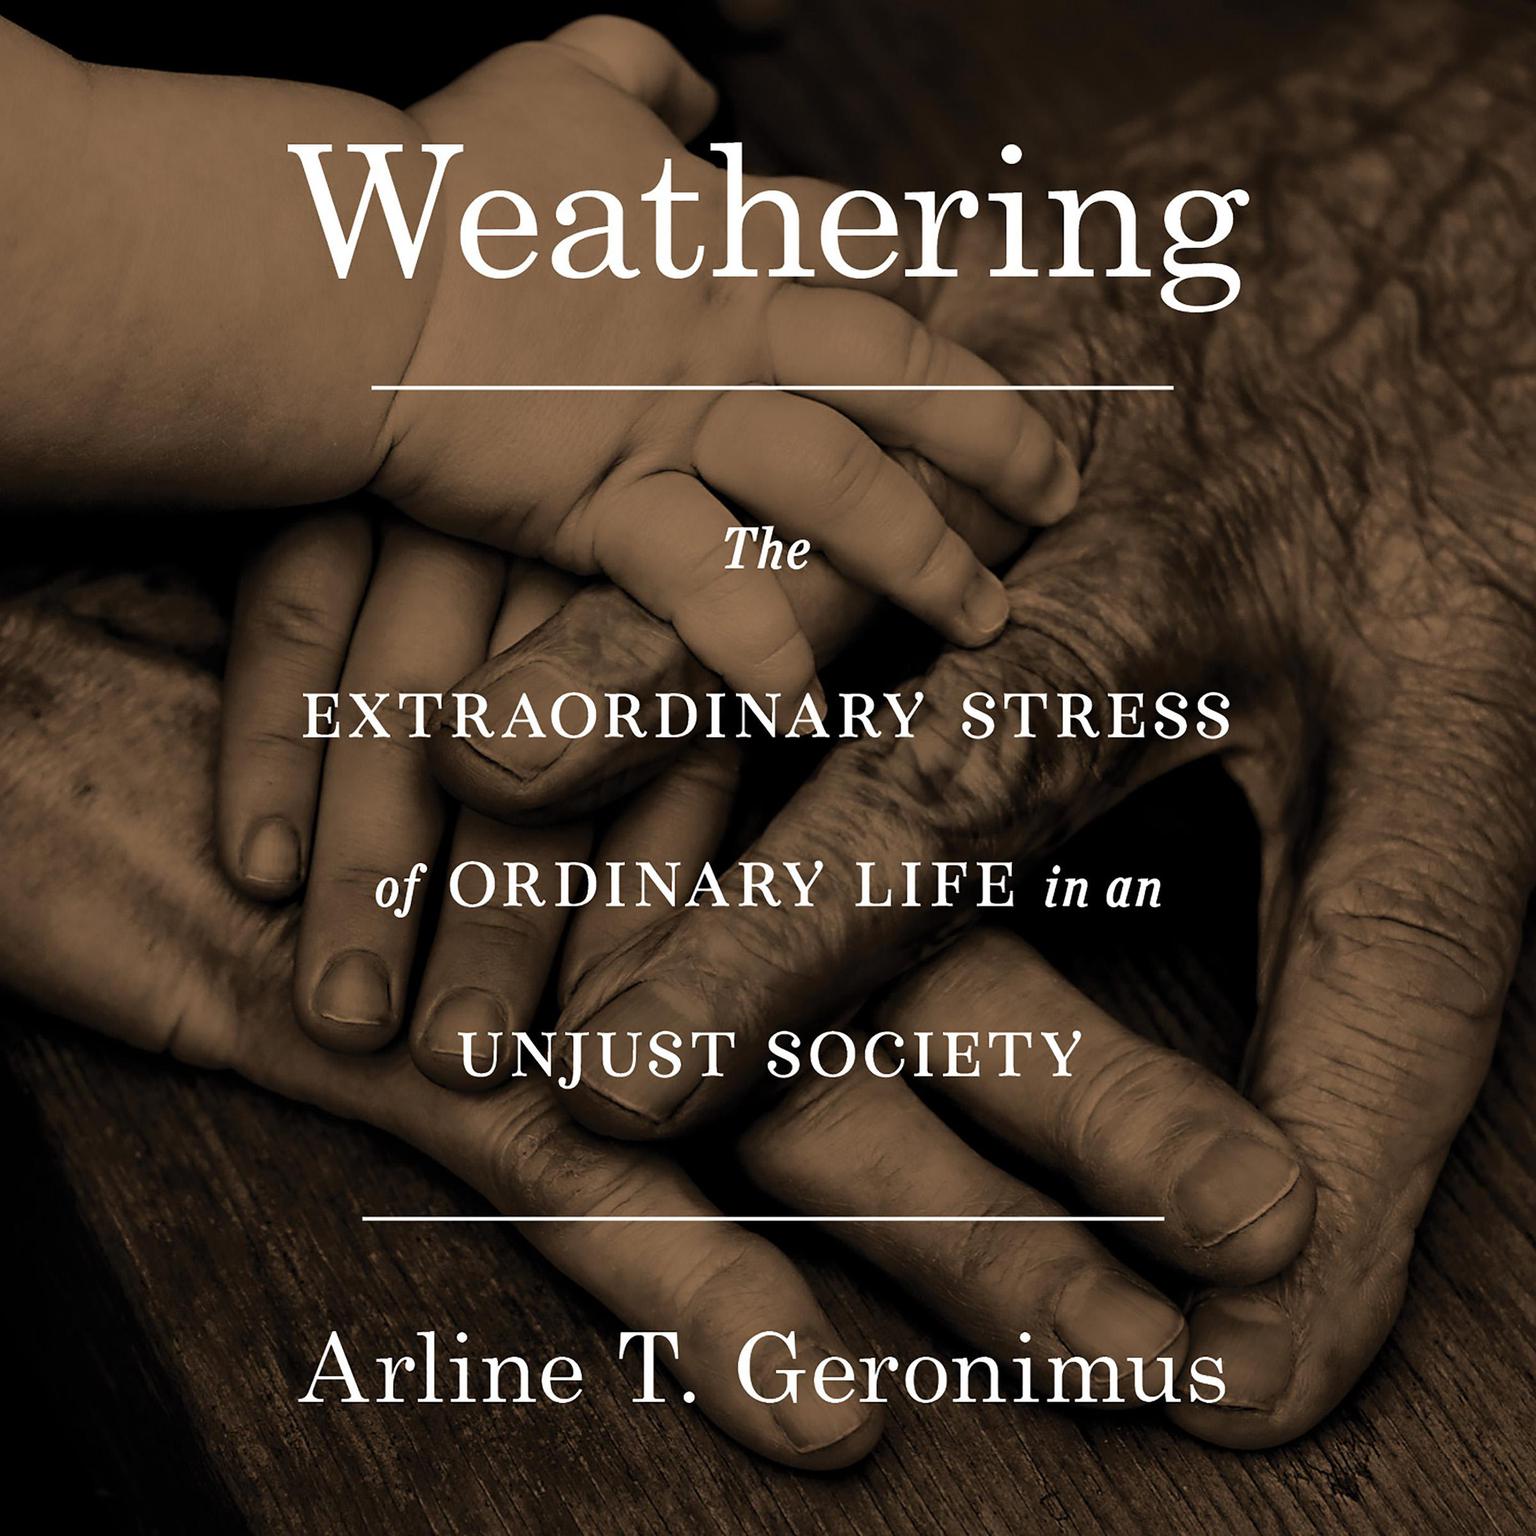 Weathering: The Extraordinary Stress of Ordinary Life in an Unjust Society Audiobook, by Arline T. Geronimus